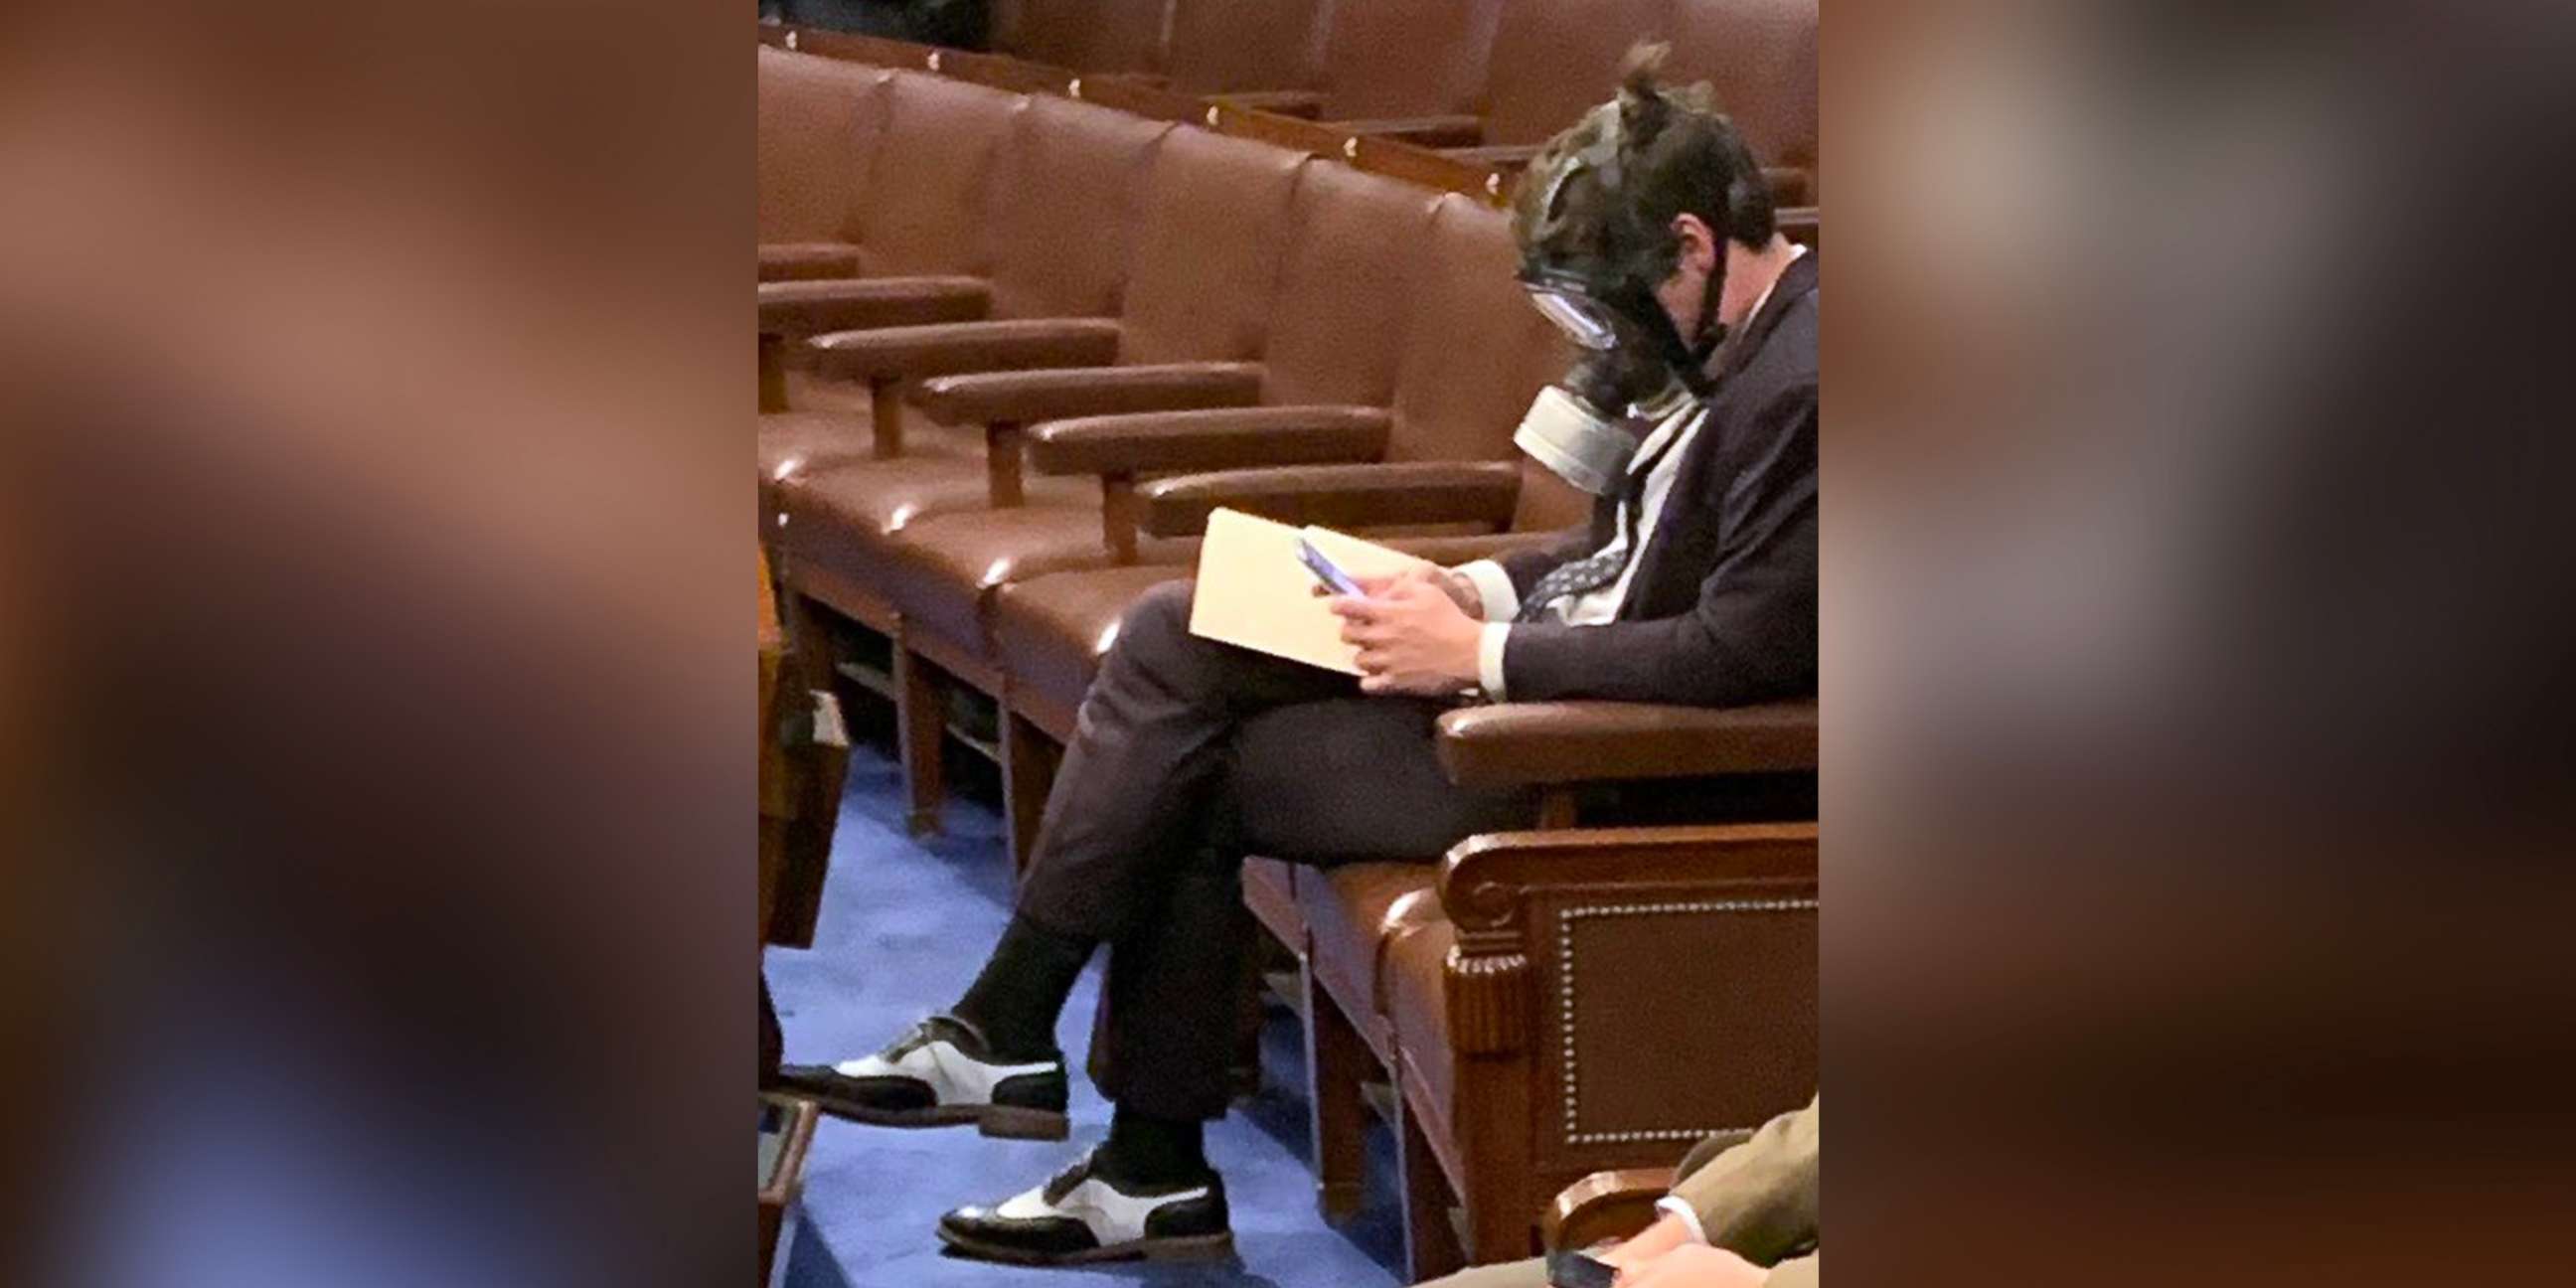 PHOTO: Rep. Matt Gaetz wears a gas mask on the House floor in Washington during a vote on coronavirus emergency funding, in a photo posted to Twitter by Rep. Jim Hines on March 4, 2020.